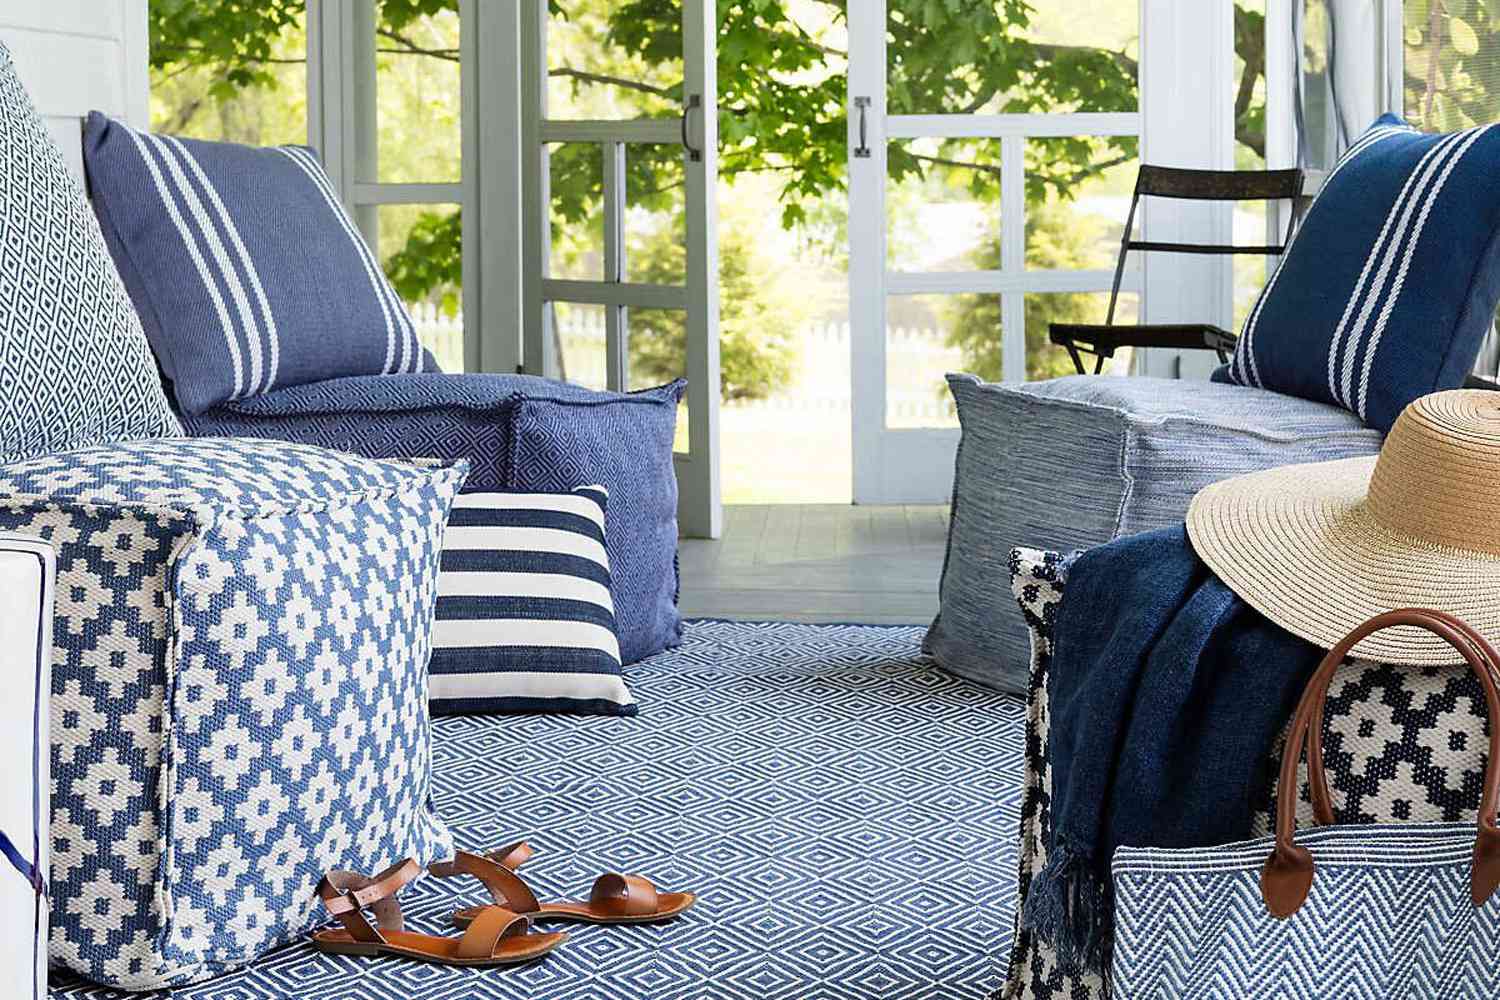 How To Get Outdoor Rugs To Stay In Place